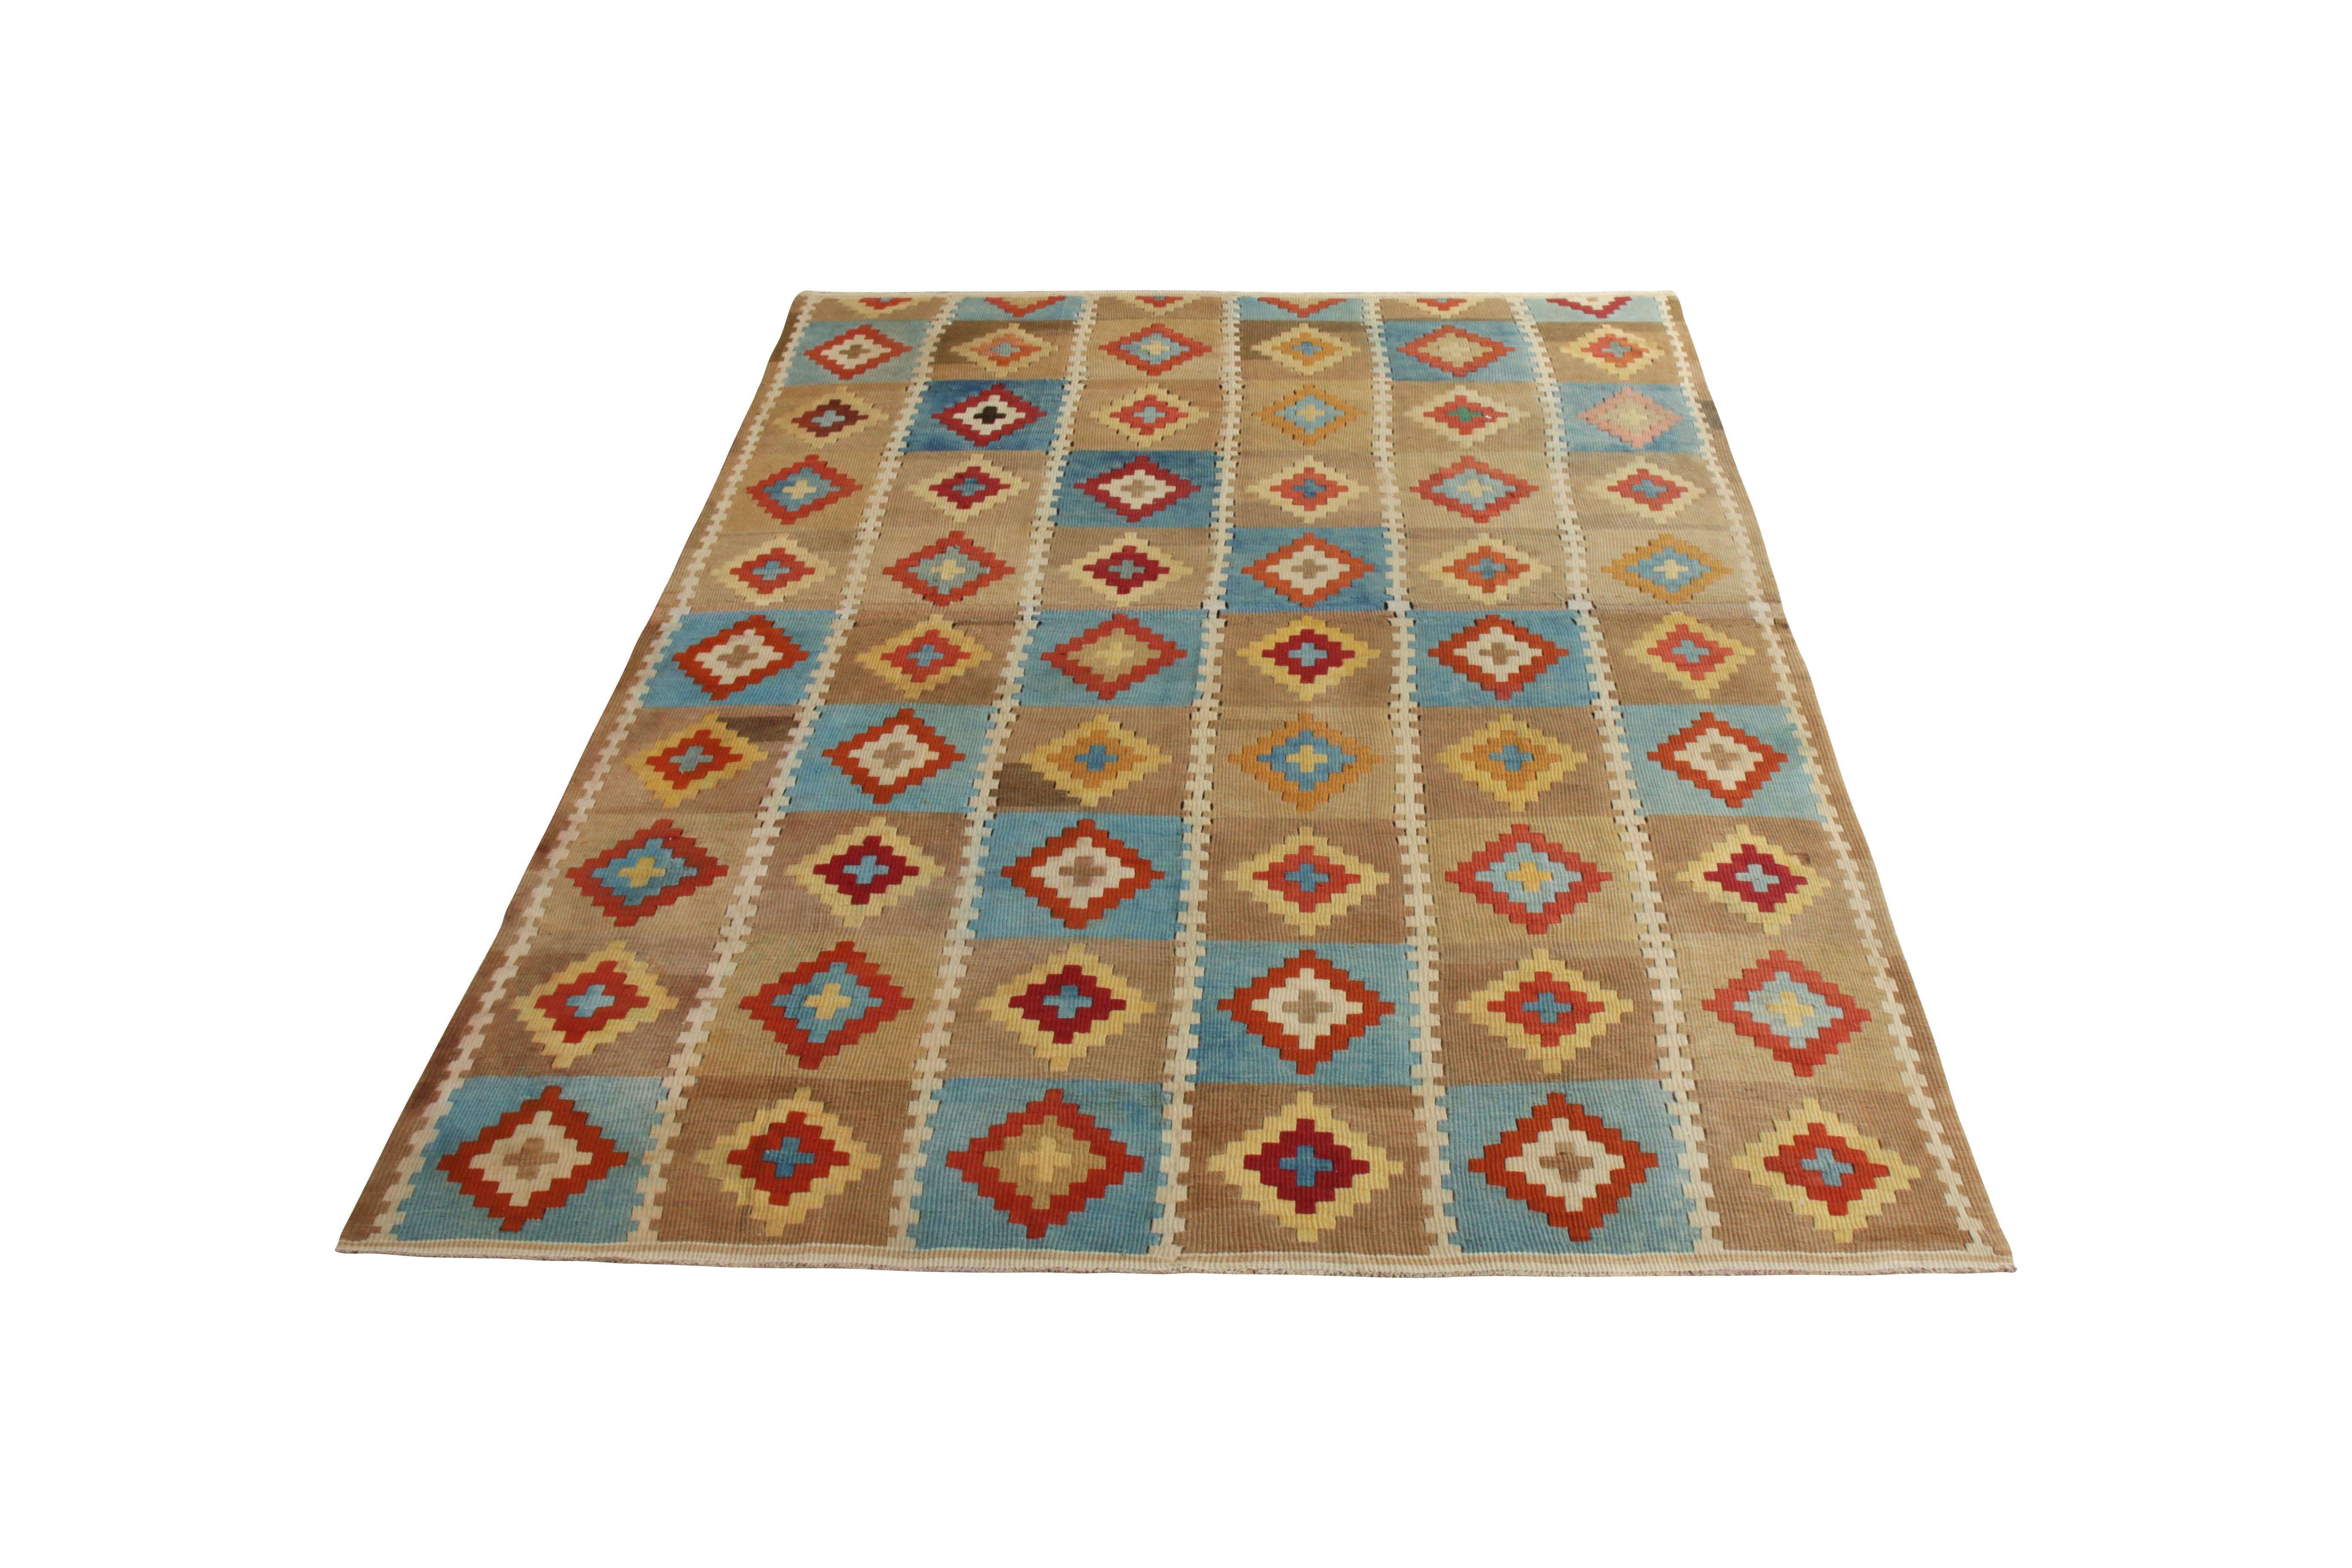 Handmade with flat-woven wool originating from Turkey circa 1950-1960, this vintage rug is a mid-century Kilim rug with a time-honored slit tapestry weave, connoting the dynamic nature of the diamond pattern and lending an arresting, collectible